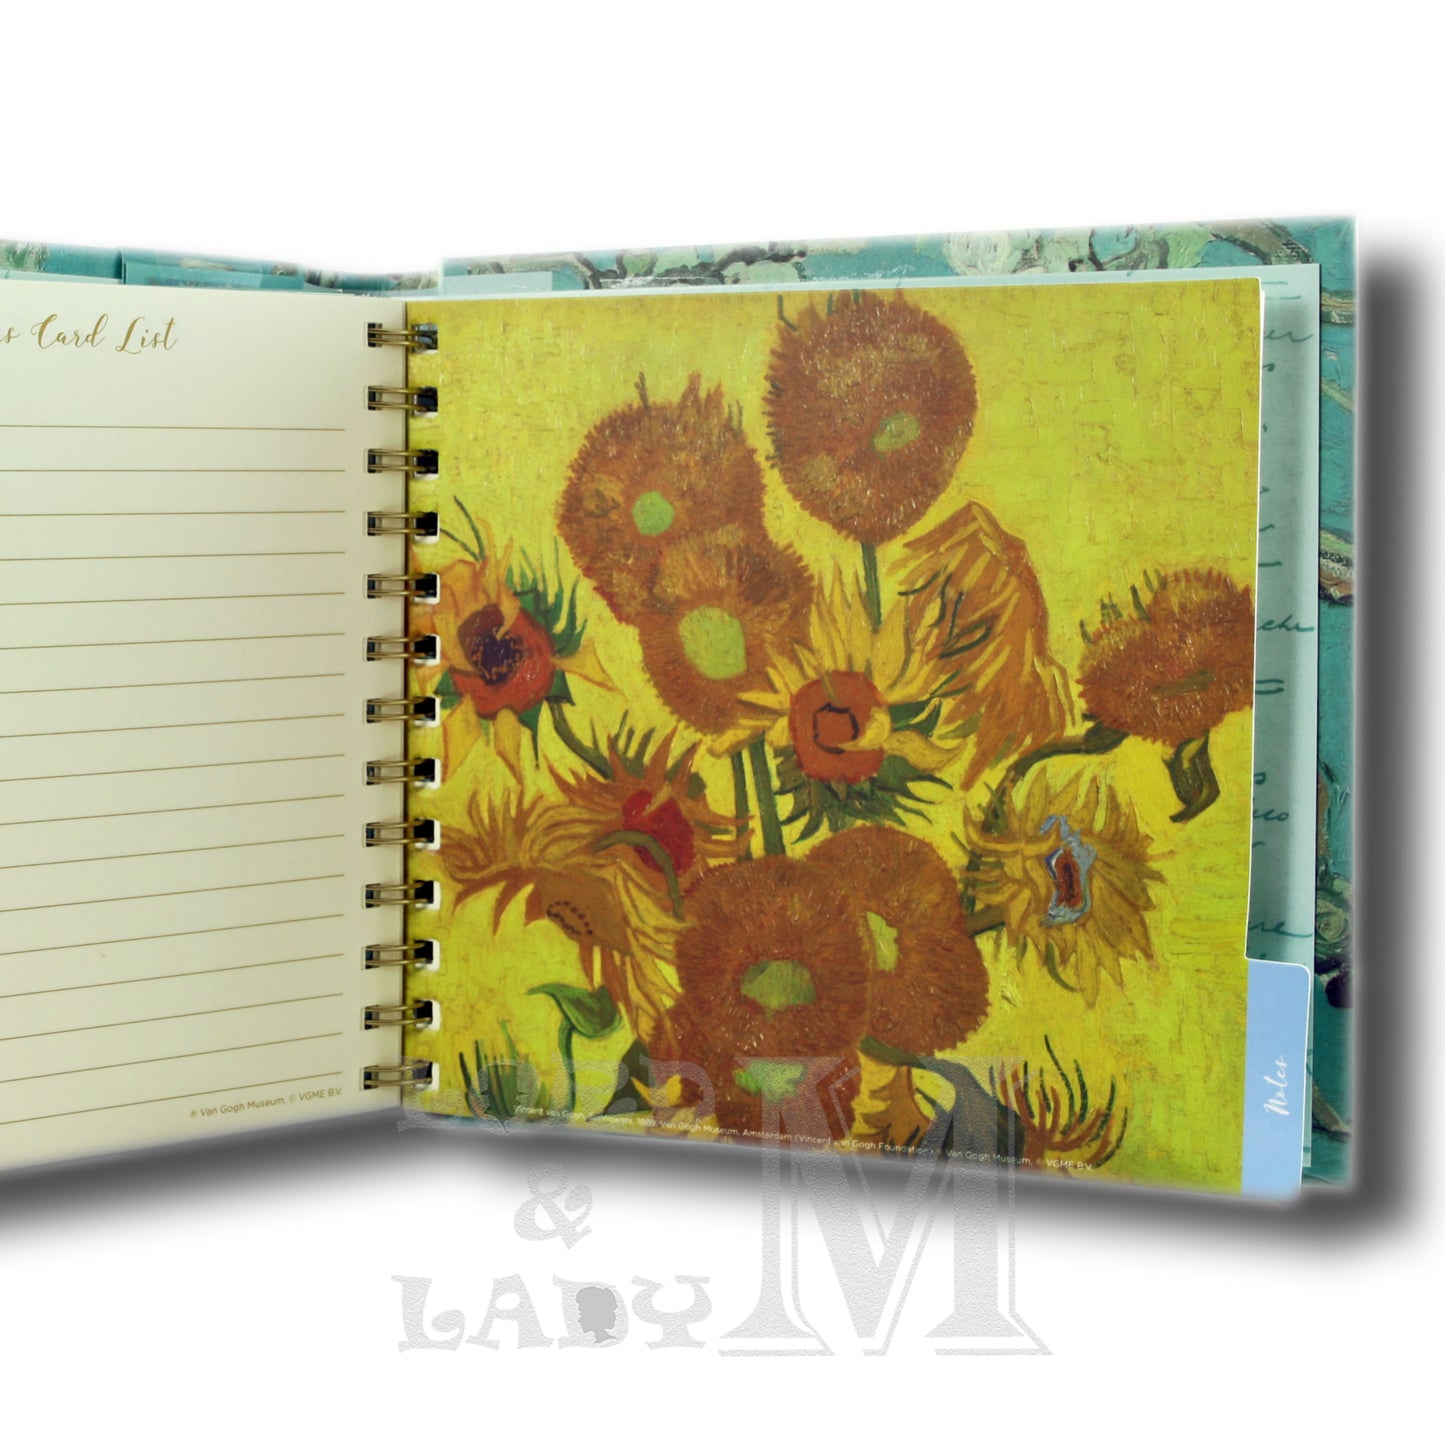 Van Gogh Square Address And Birthday Book - Perfect Gift